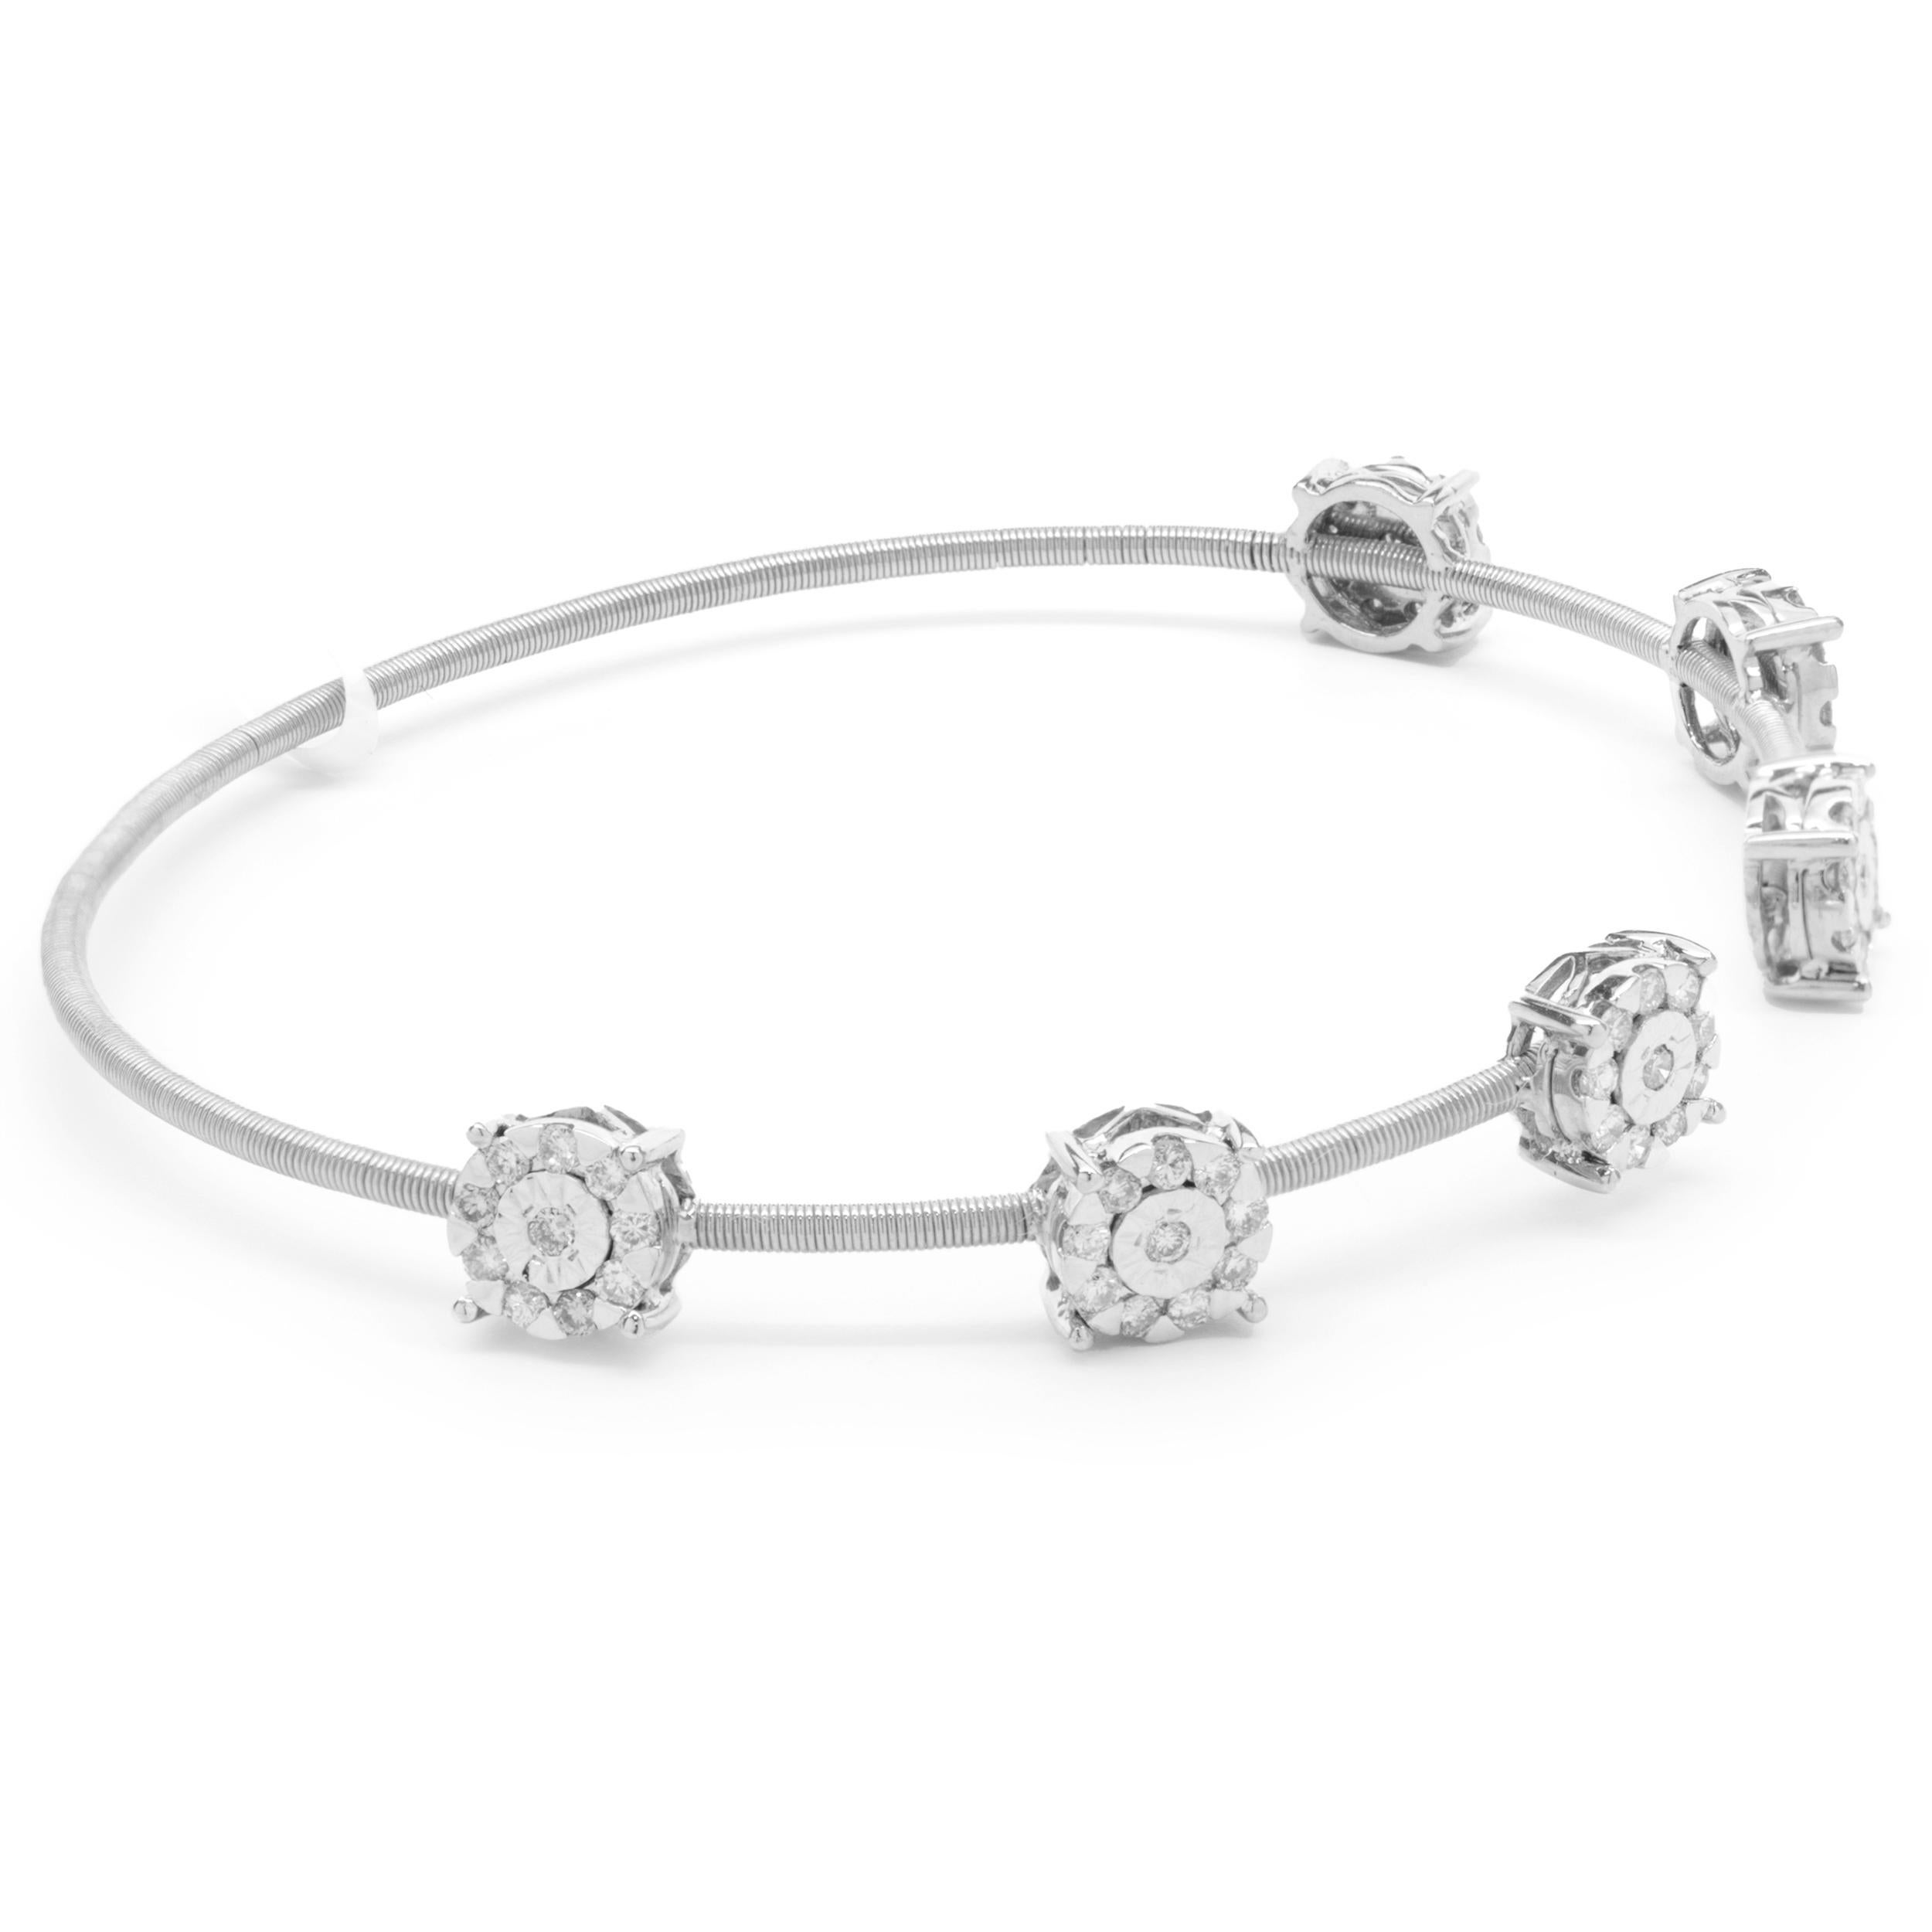 Designer: custom 
Material: 14K white gold
Diamond: 60 round diamonds= 0.70cttw
Color:  G
Clarity: VS
Dimensions: bracelet will fit up to a 7.5-inch wrist
Weight: 6.86 grams
